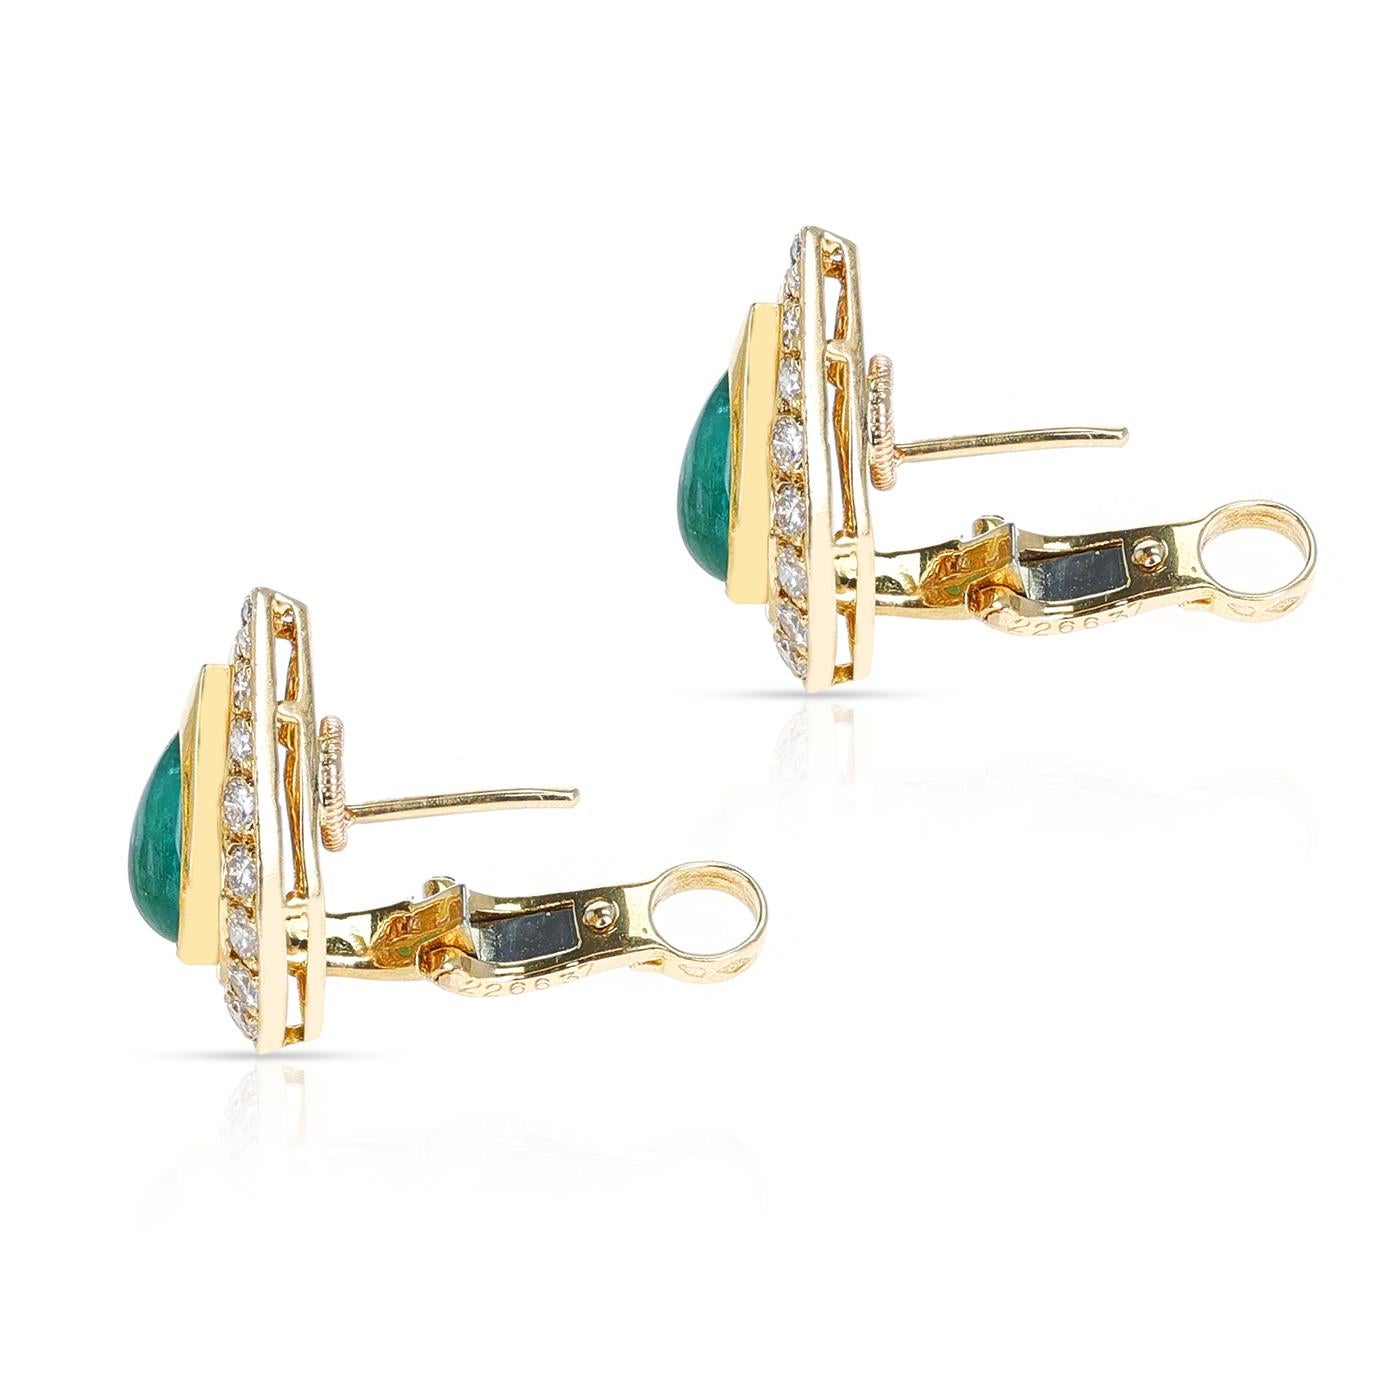 A pair of Cartier Pear Shape Emerald and Diamond Earrings made in 18 Karat Yellow Gold. The total weight of the earrings is 8.10 grams. The length of the earring is 0.75 inches. 

